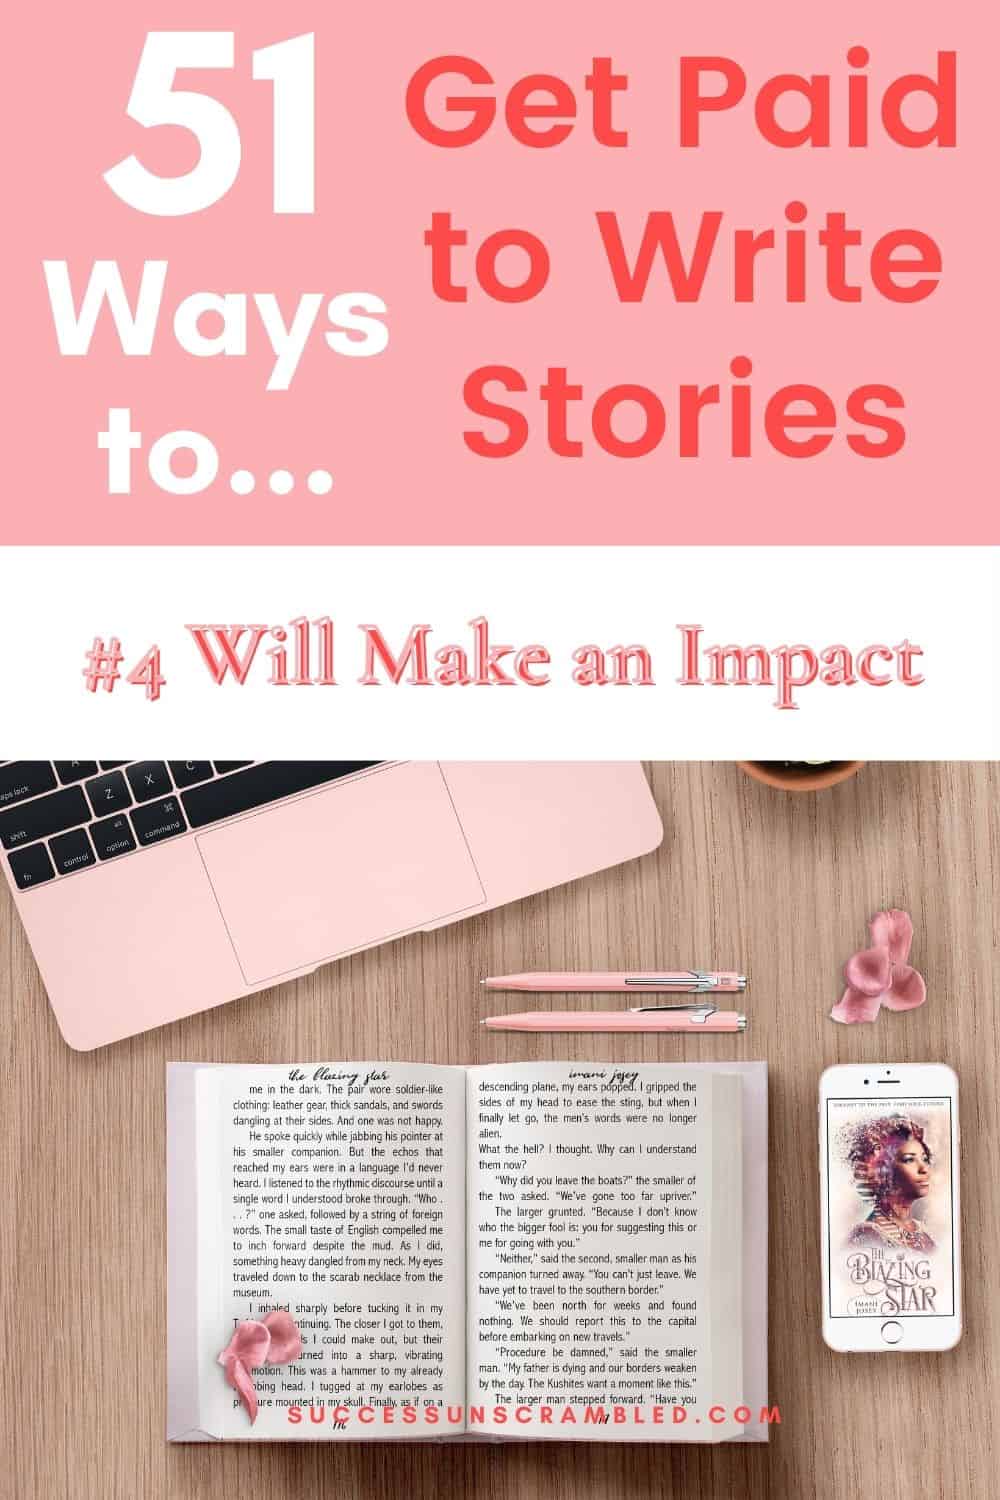 51 ways to get paid to write stores pinterest pin